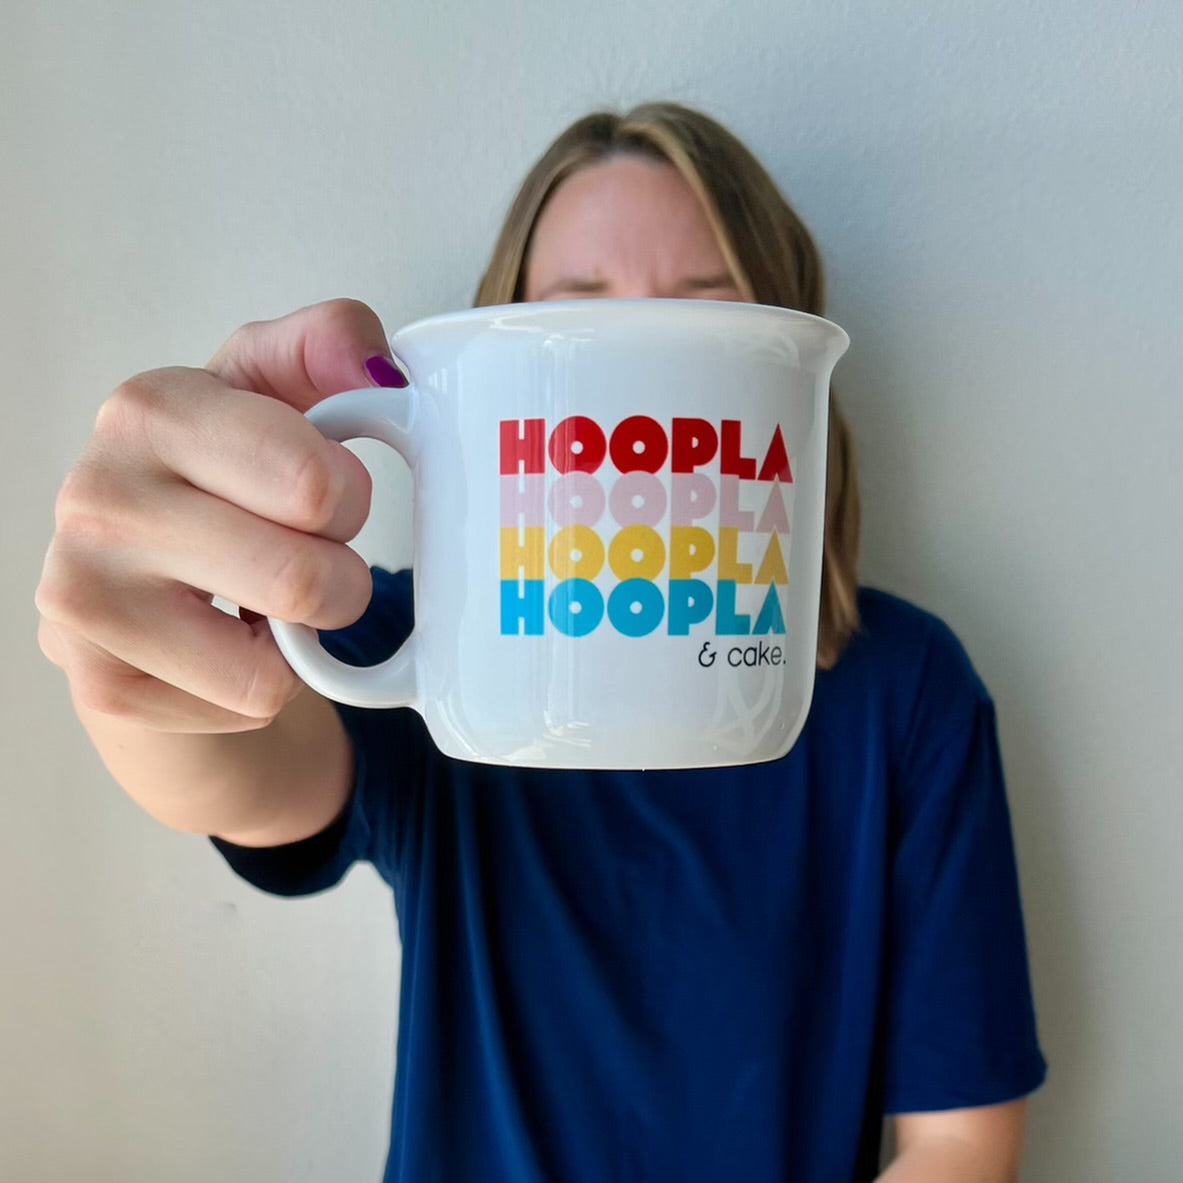 A woman is holding the handle of a large white, shiny, campfire-style ceramic mug. It has the word "HOOPLA" written 4 times, one word in each row, and in all caps. The font has a slightly retro feel. Each HOOPLA has a different color: red, pink, yellow, and teal. Under the 4 HOOPLAs and to the right are "& cake" in a simple black font. This 15oz mug is larger than a standard mug and has bright, contrasting colors. 